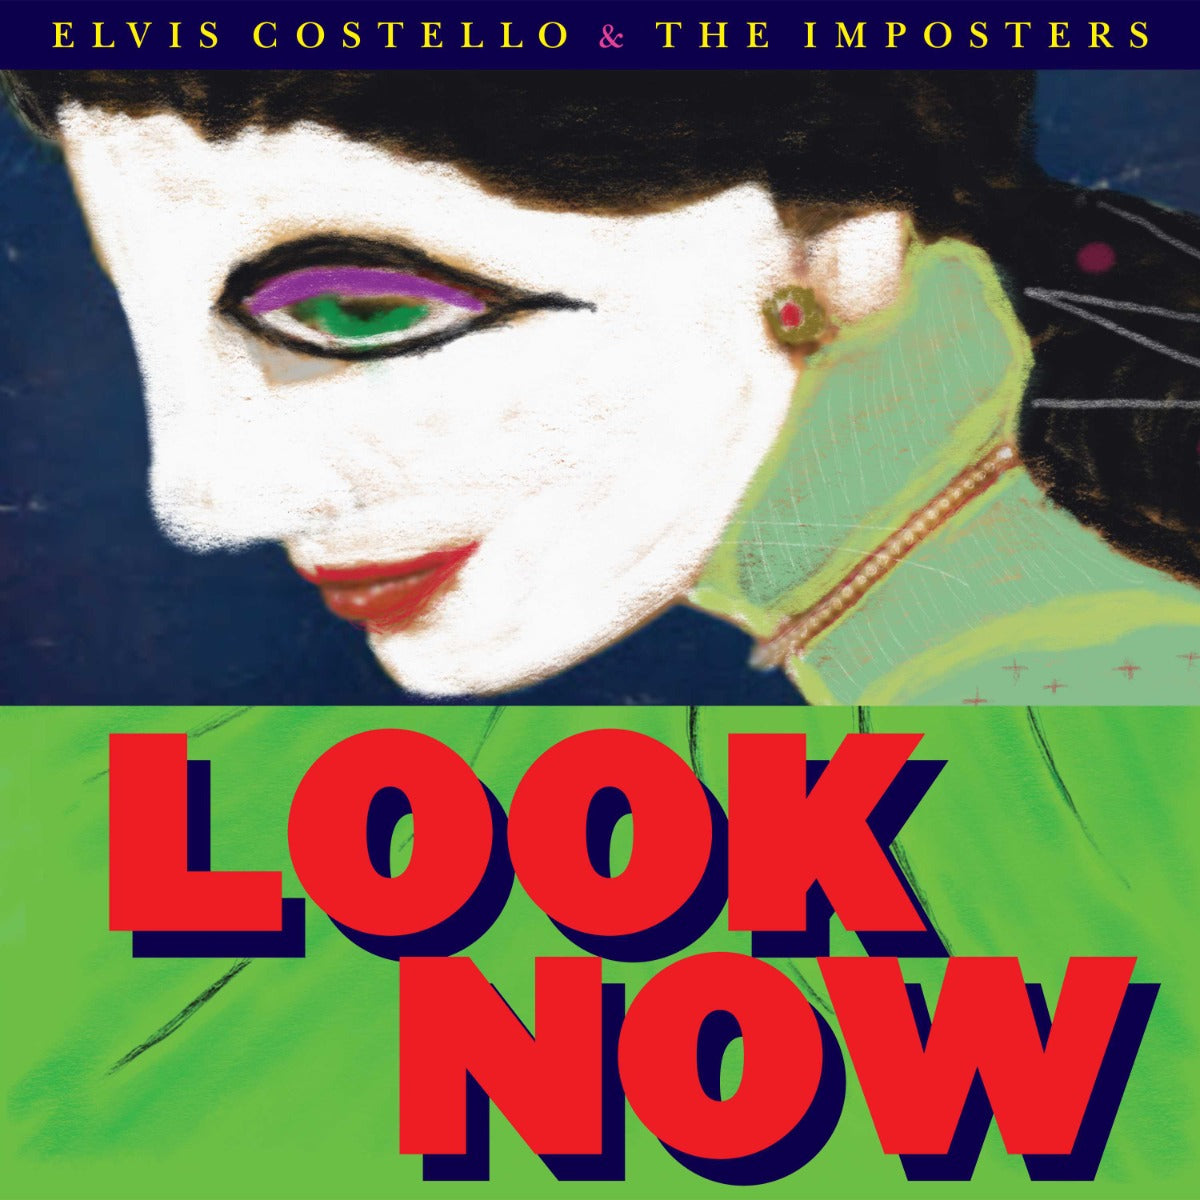 Elvis Costello & The Imposters | Look Now (Deluxe Edition, Limited Edition, Colored Vinyl, Red) (2 Lp's) | Vinyl